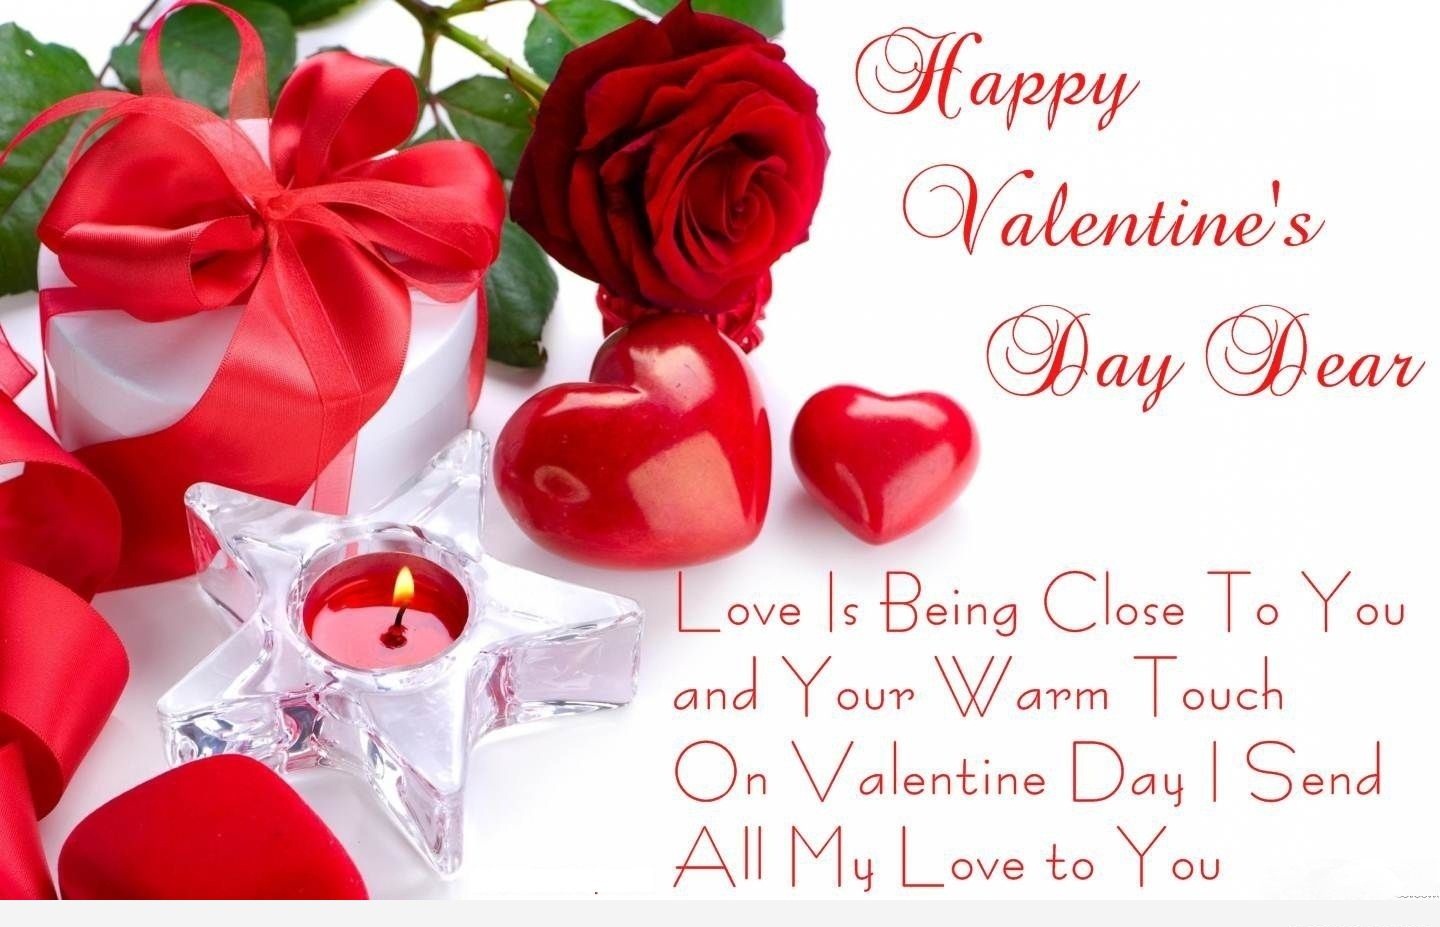 14th February 2023 Valentine's Day Wishing Cards Image Pics